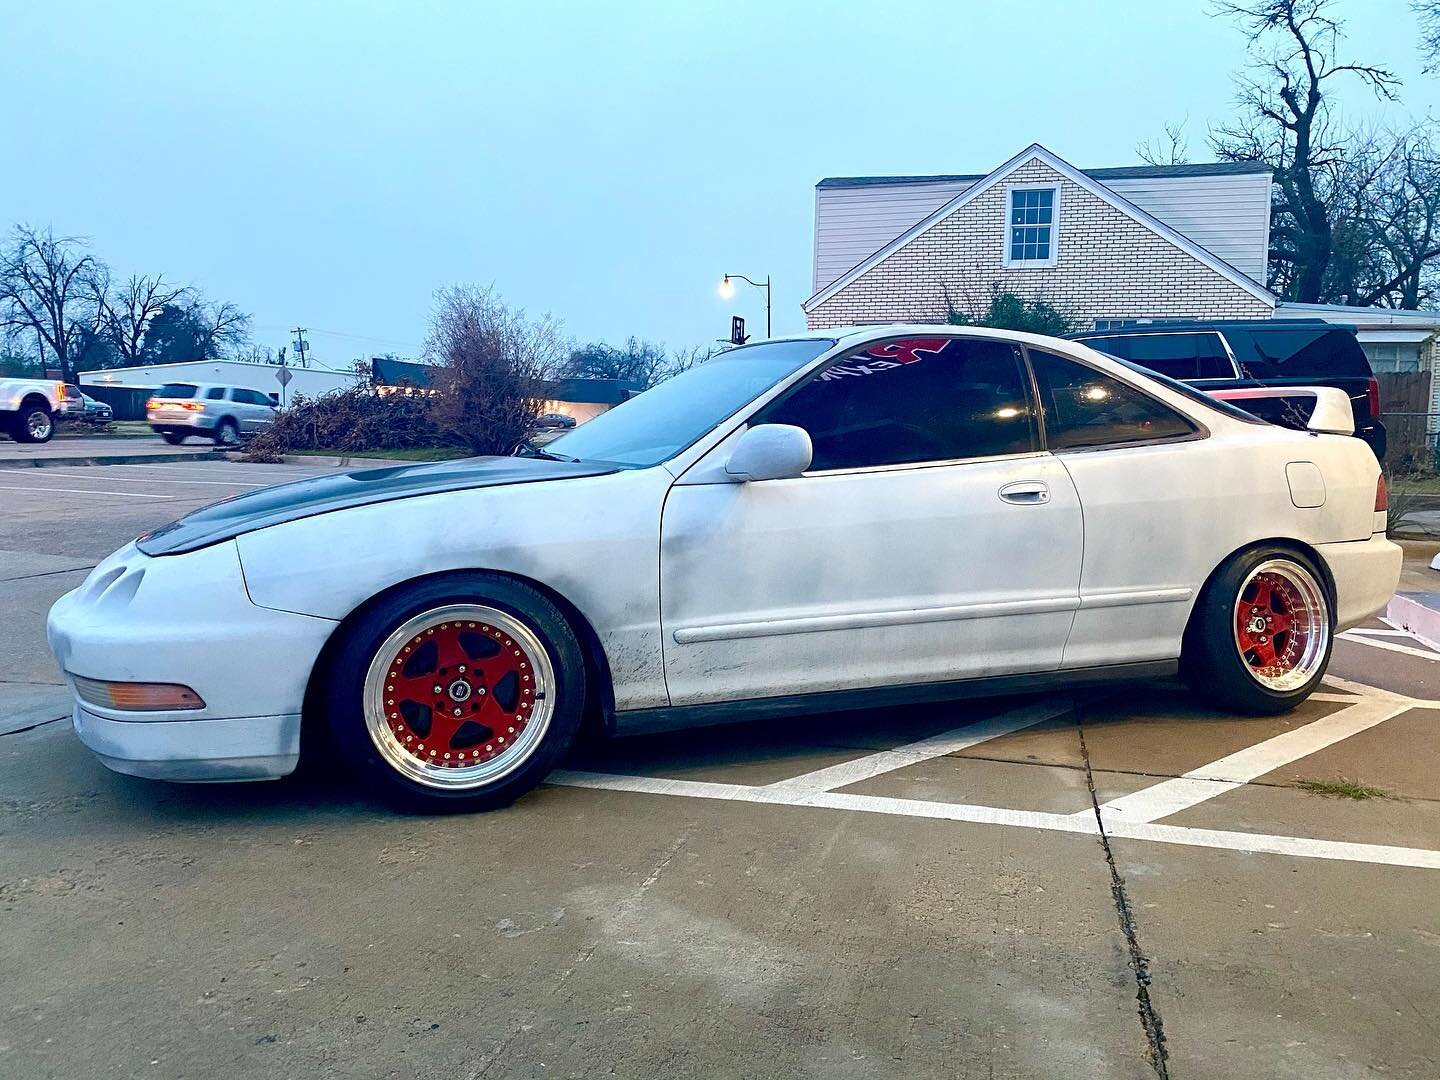 Check out these @spec1wheels red and gold star rims on this #acuraintegra 
Come get some new rims with that $5 bill you got in your Christmas stocking😉. Just $5 down for a set! #spec1wheels #redrims #redwheels #starwheels #acura